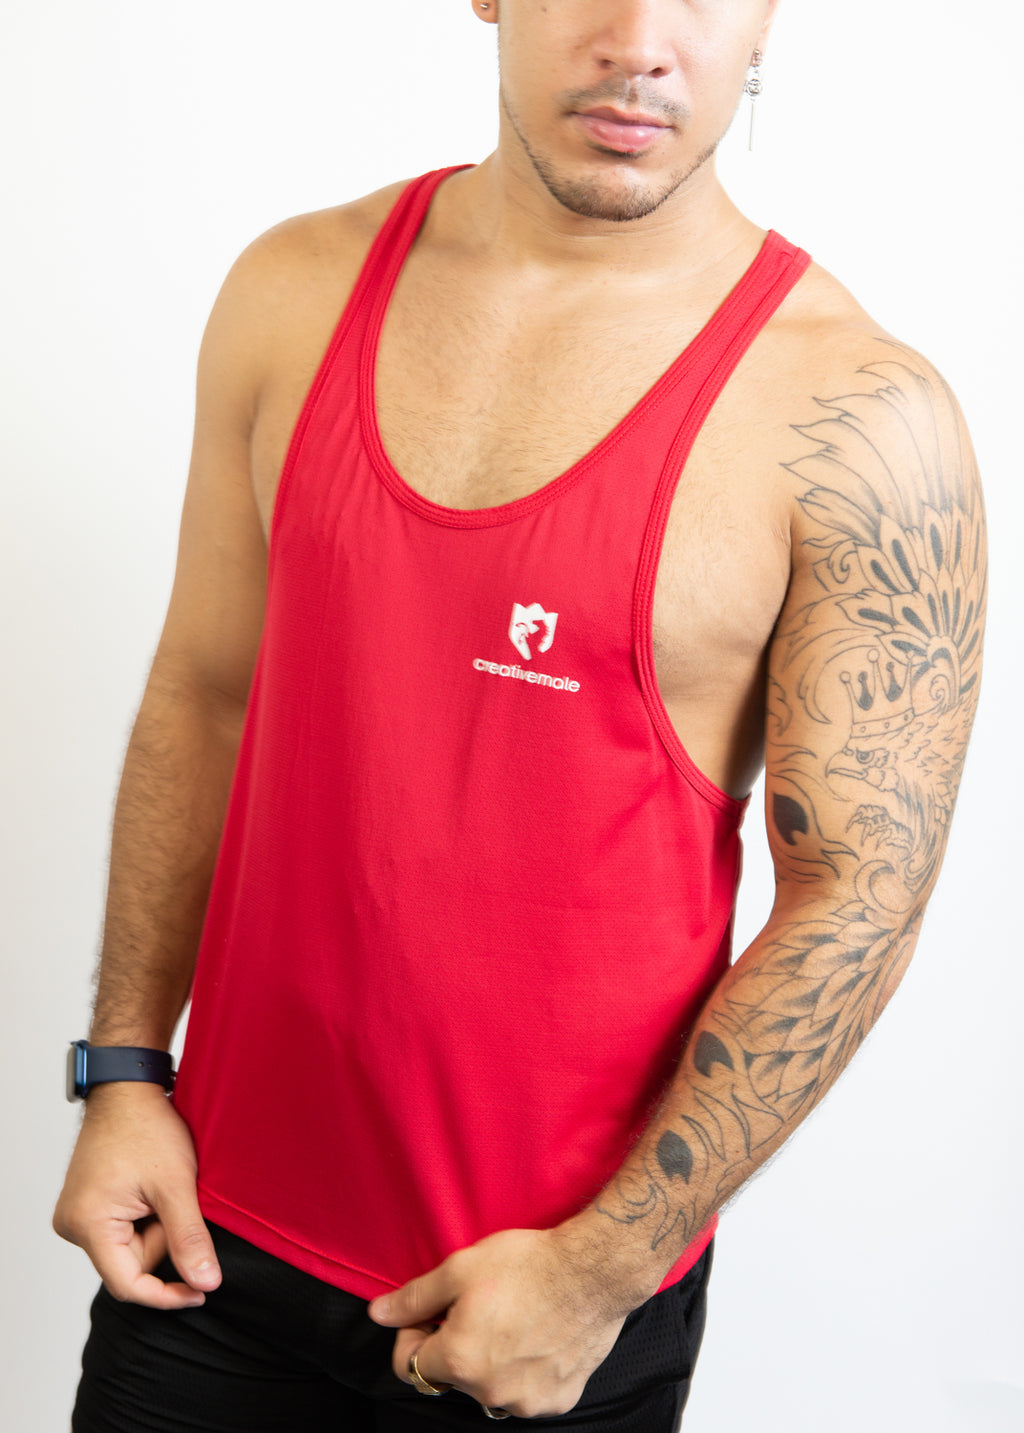 CREATIVE MALE GYM TANK - 5 Colors to Choose From